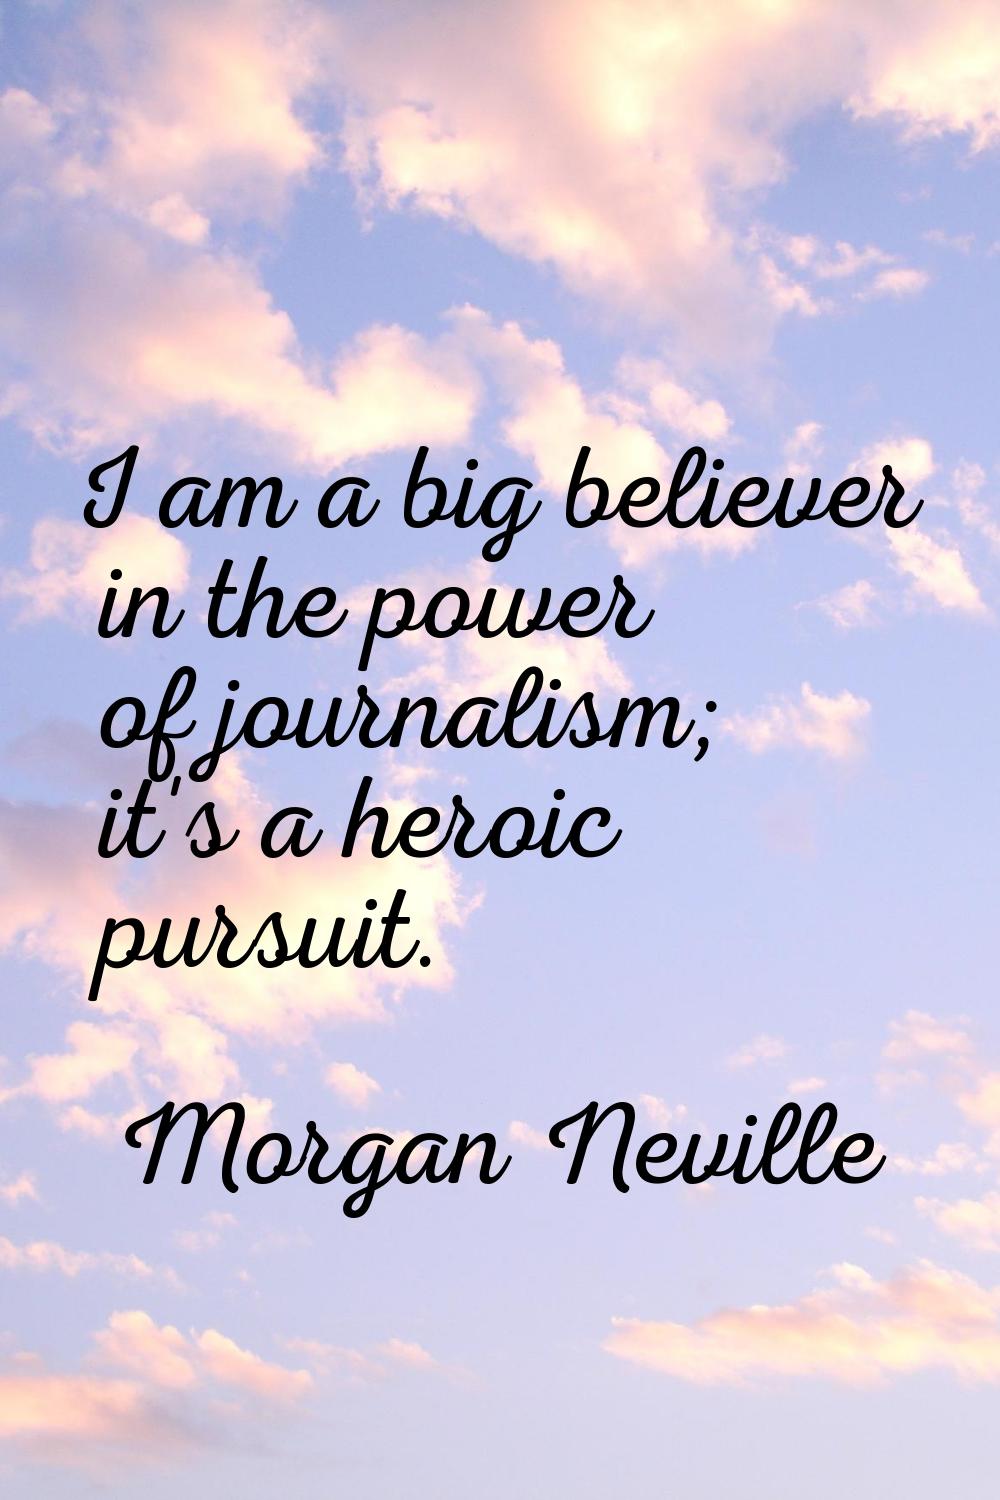 I am a big believer in the power of journalism; it's a heroic pursuit.